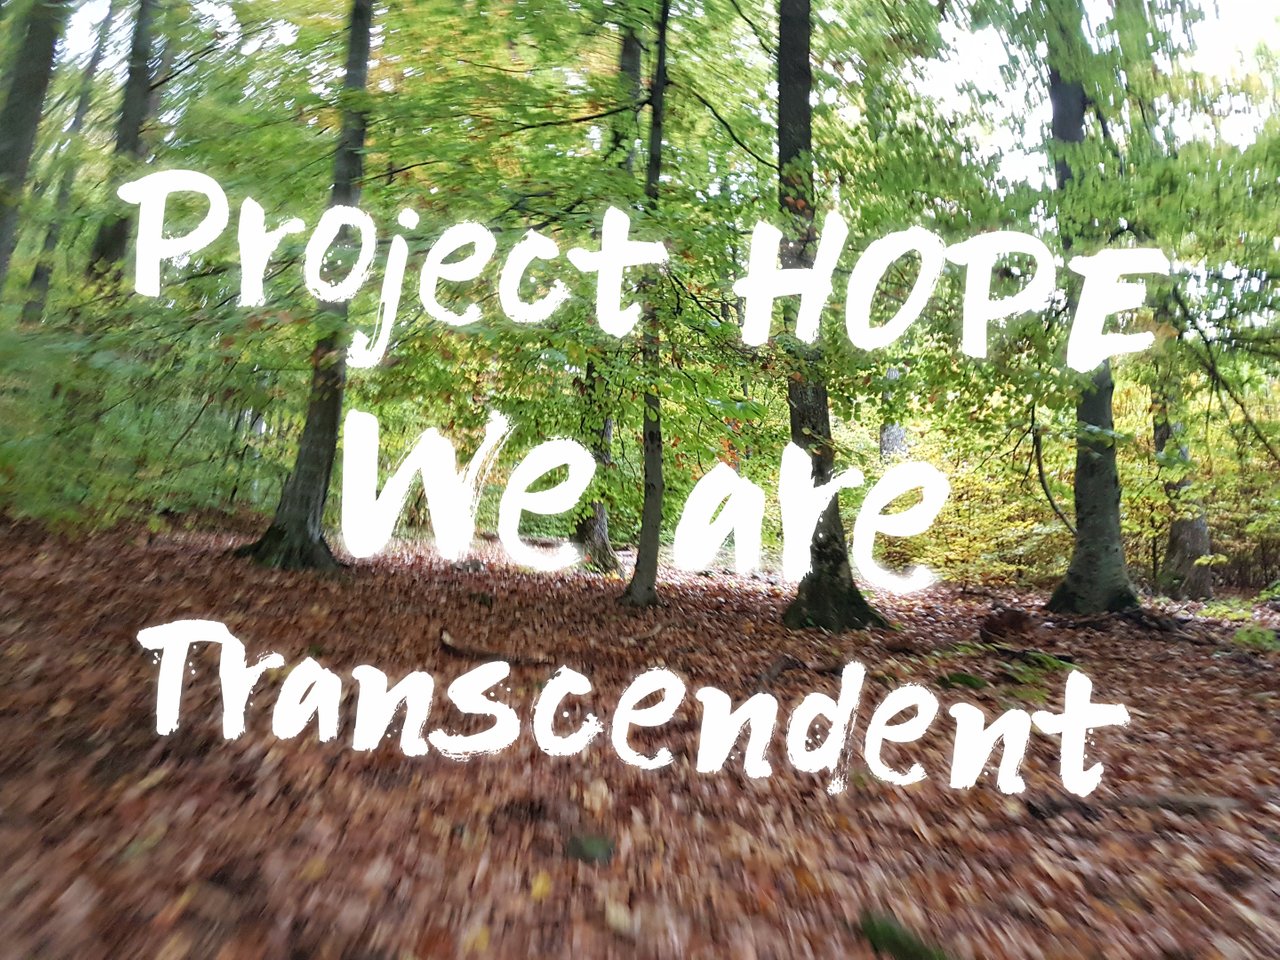 Project Hope - We are Transcendent